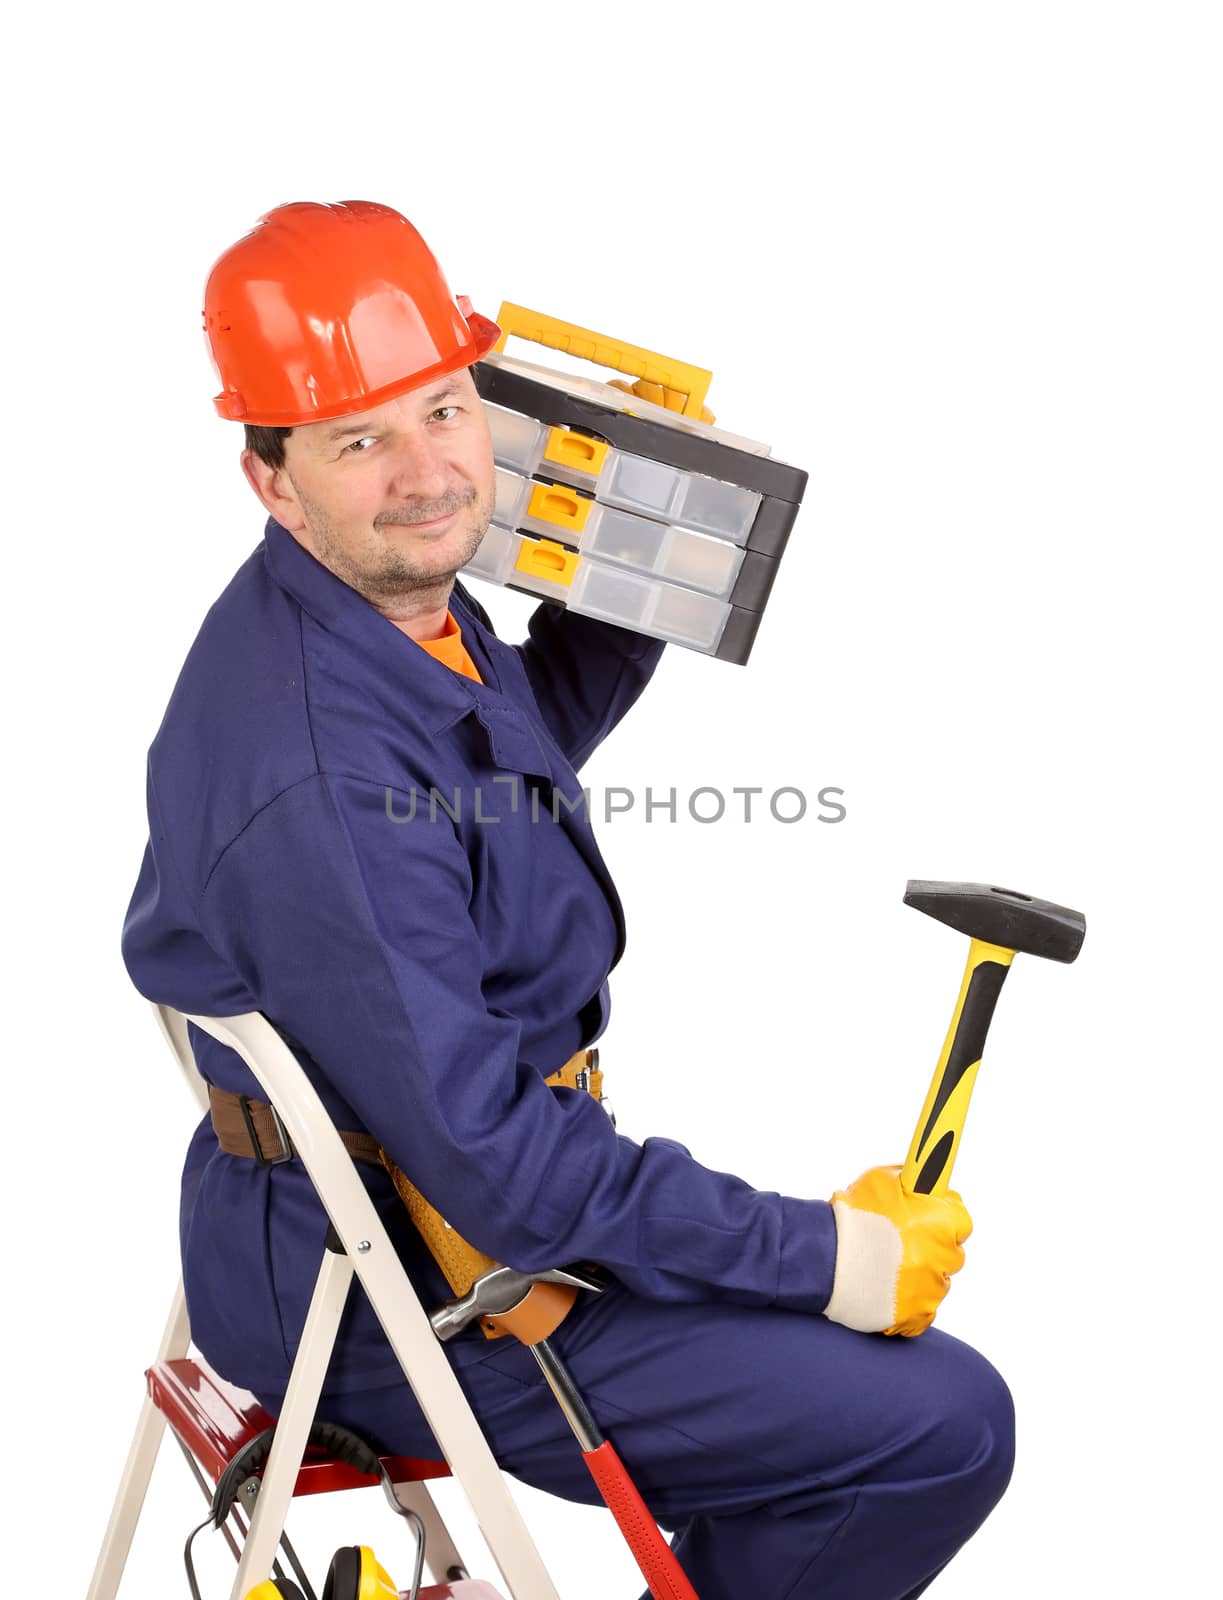 Worker on ladder with hammer and toolbox. Isolated on a white background.